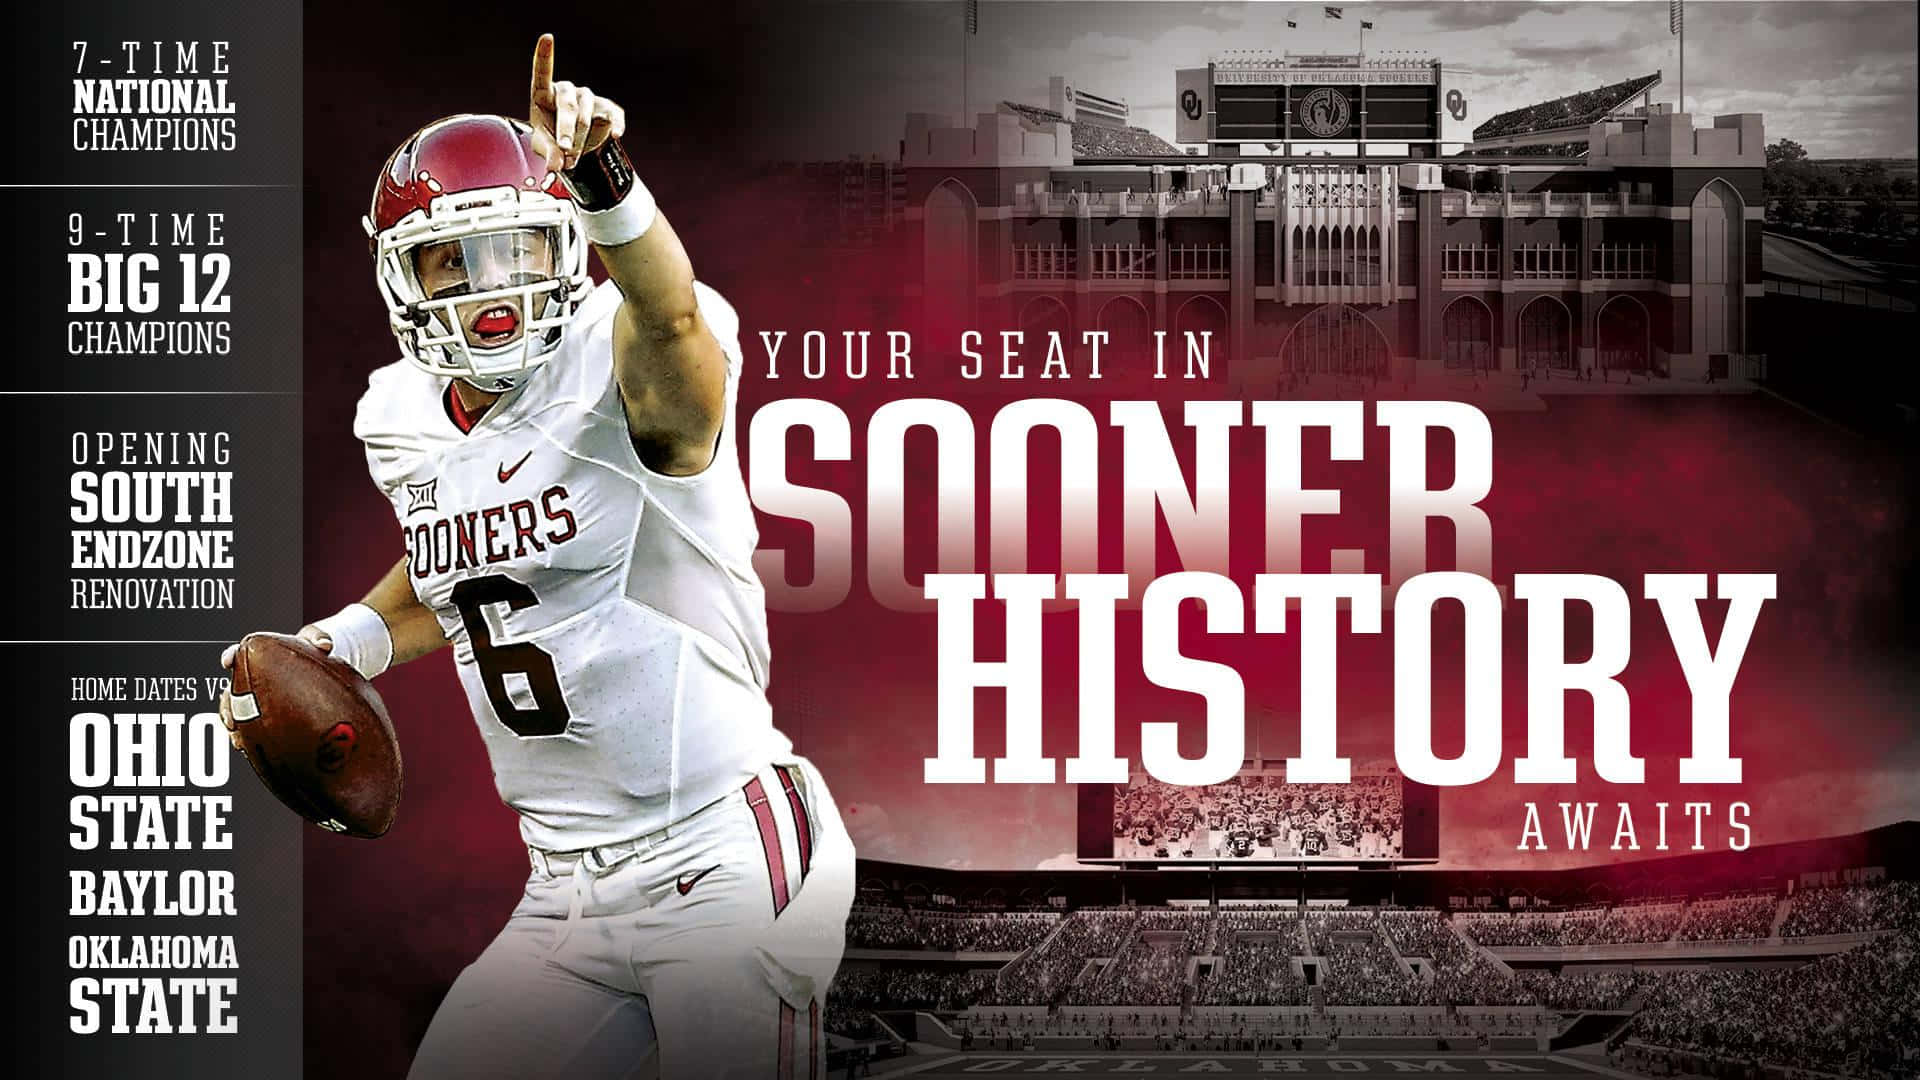 The Sooners fight on and win big with the support of their loud and proud fan base. Wallpaper